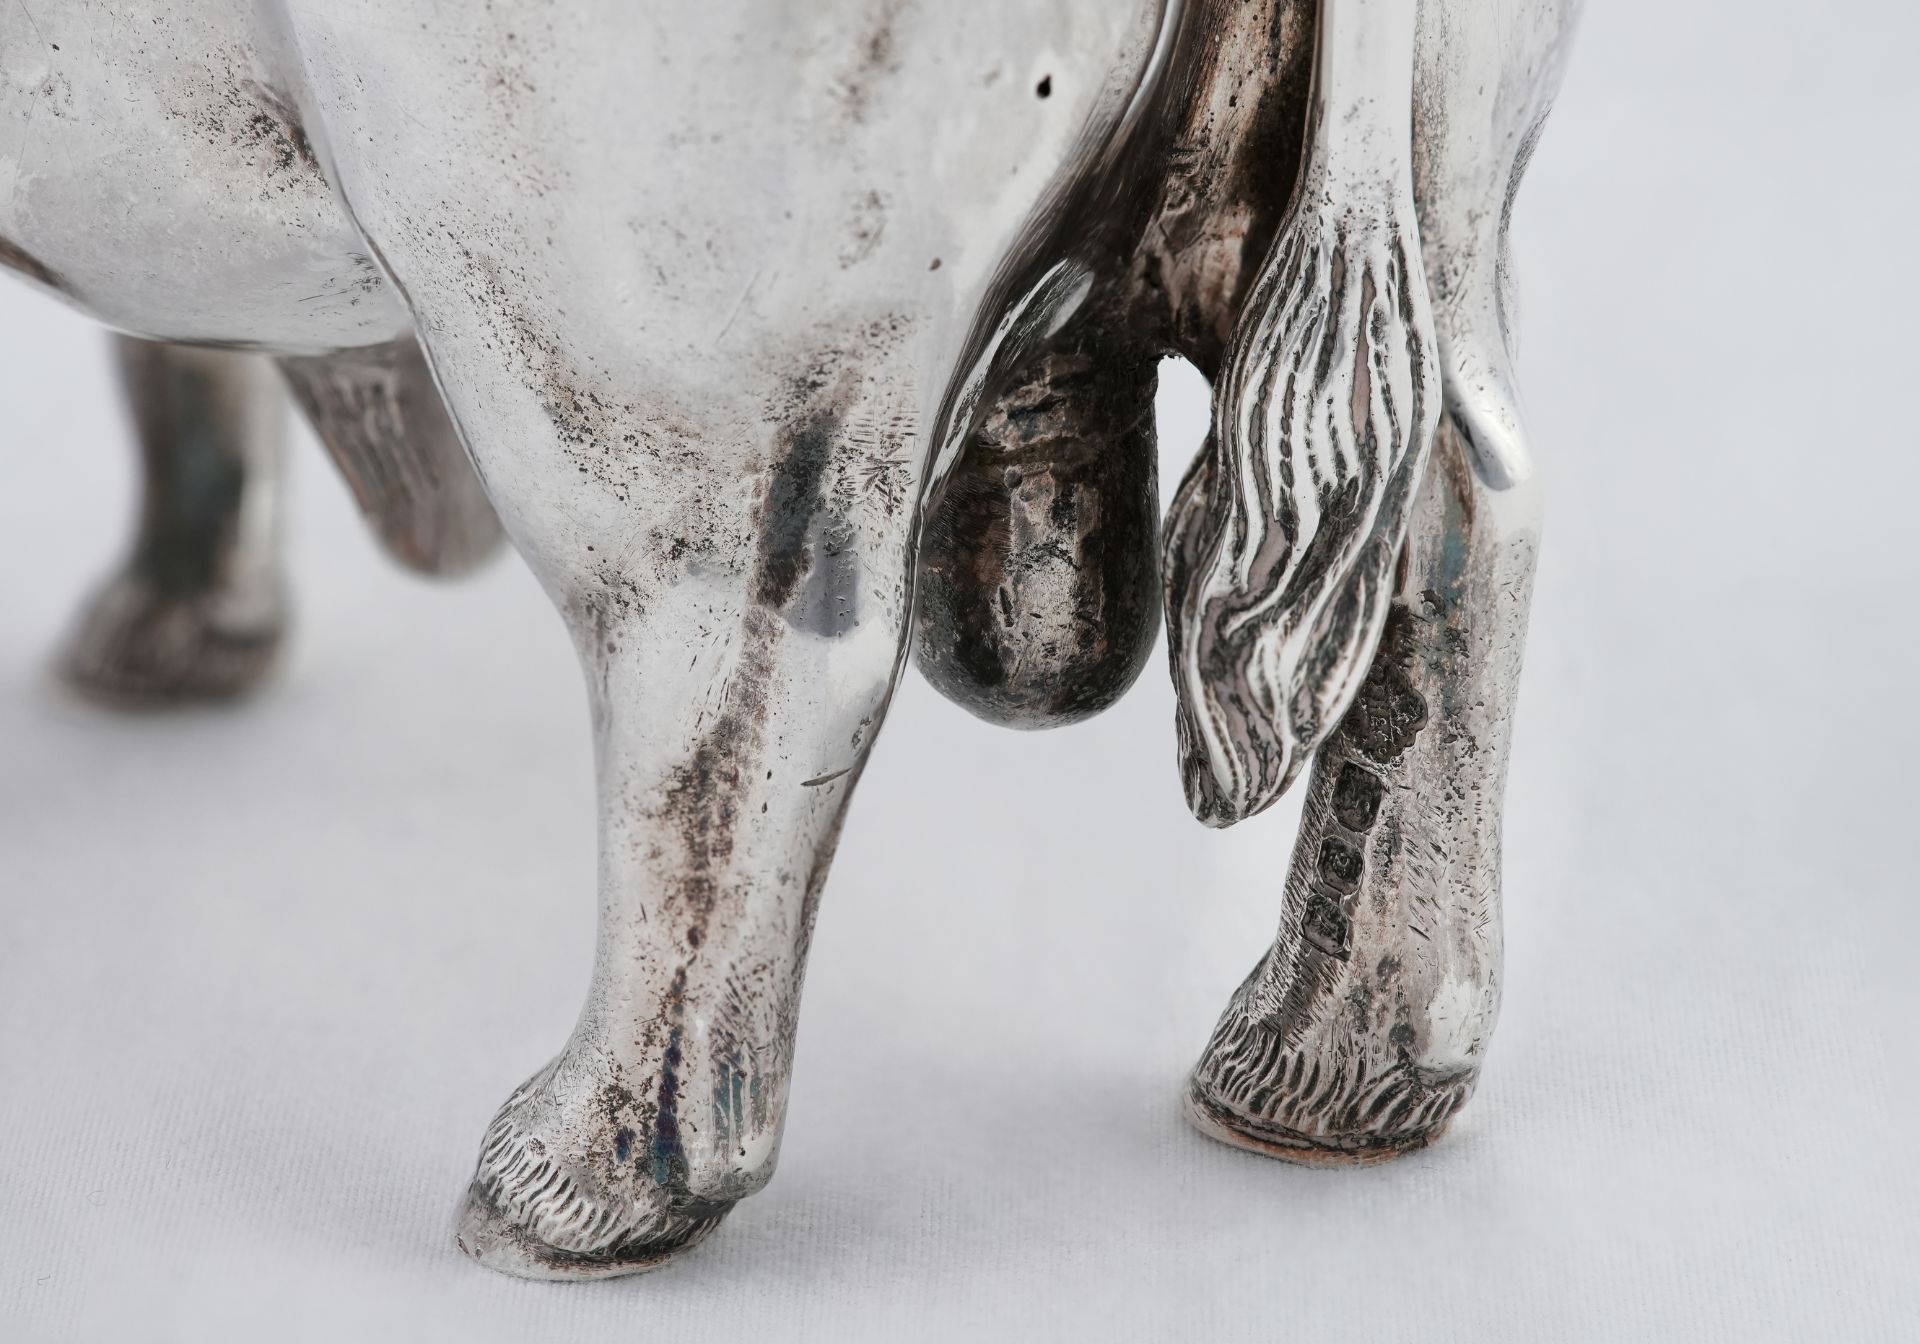 Sterling Silver Figure of Bull - Image 4 of 4